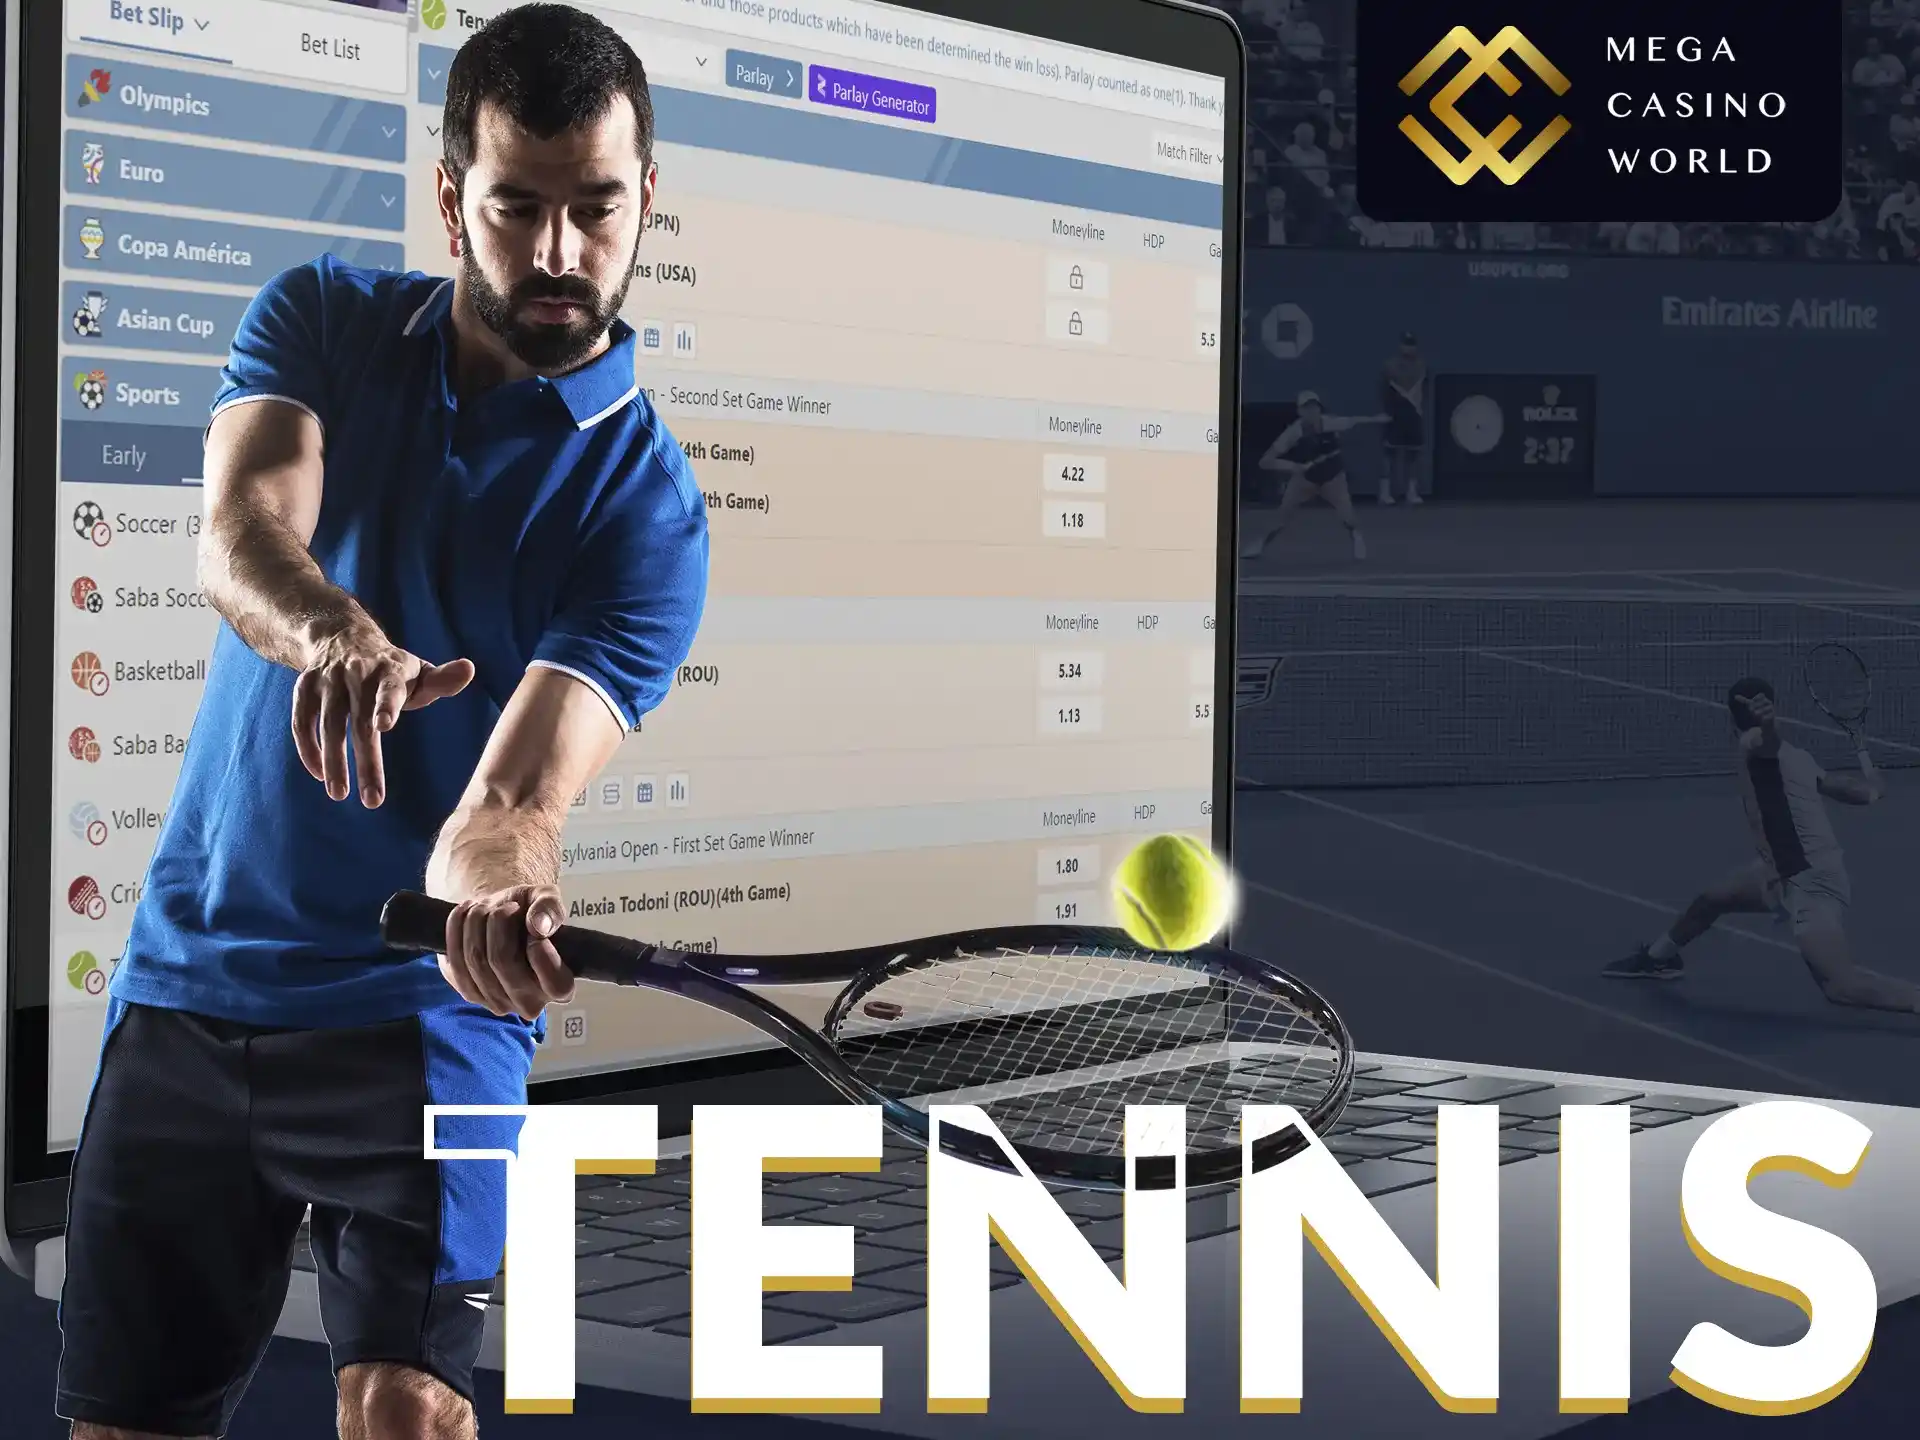 Mega Casino World offers betting for the tennis enthusiasts on the site.